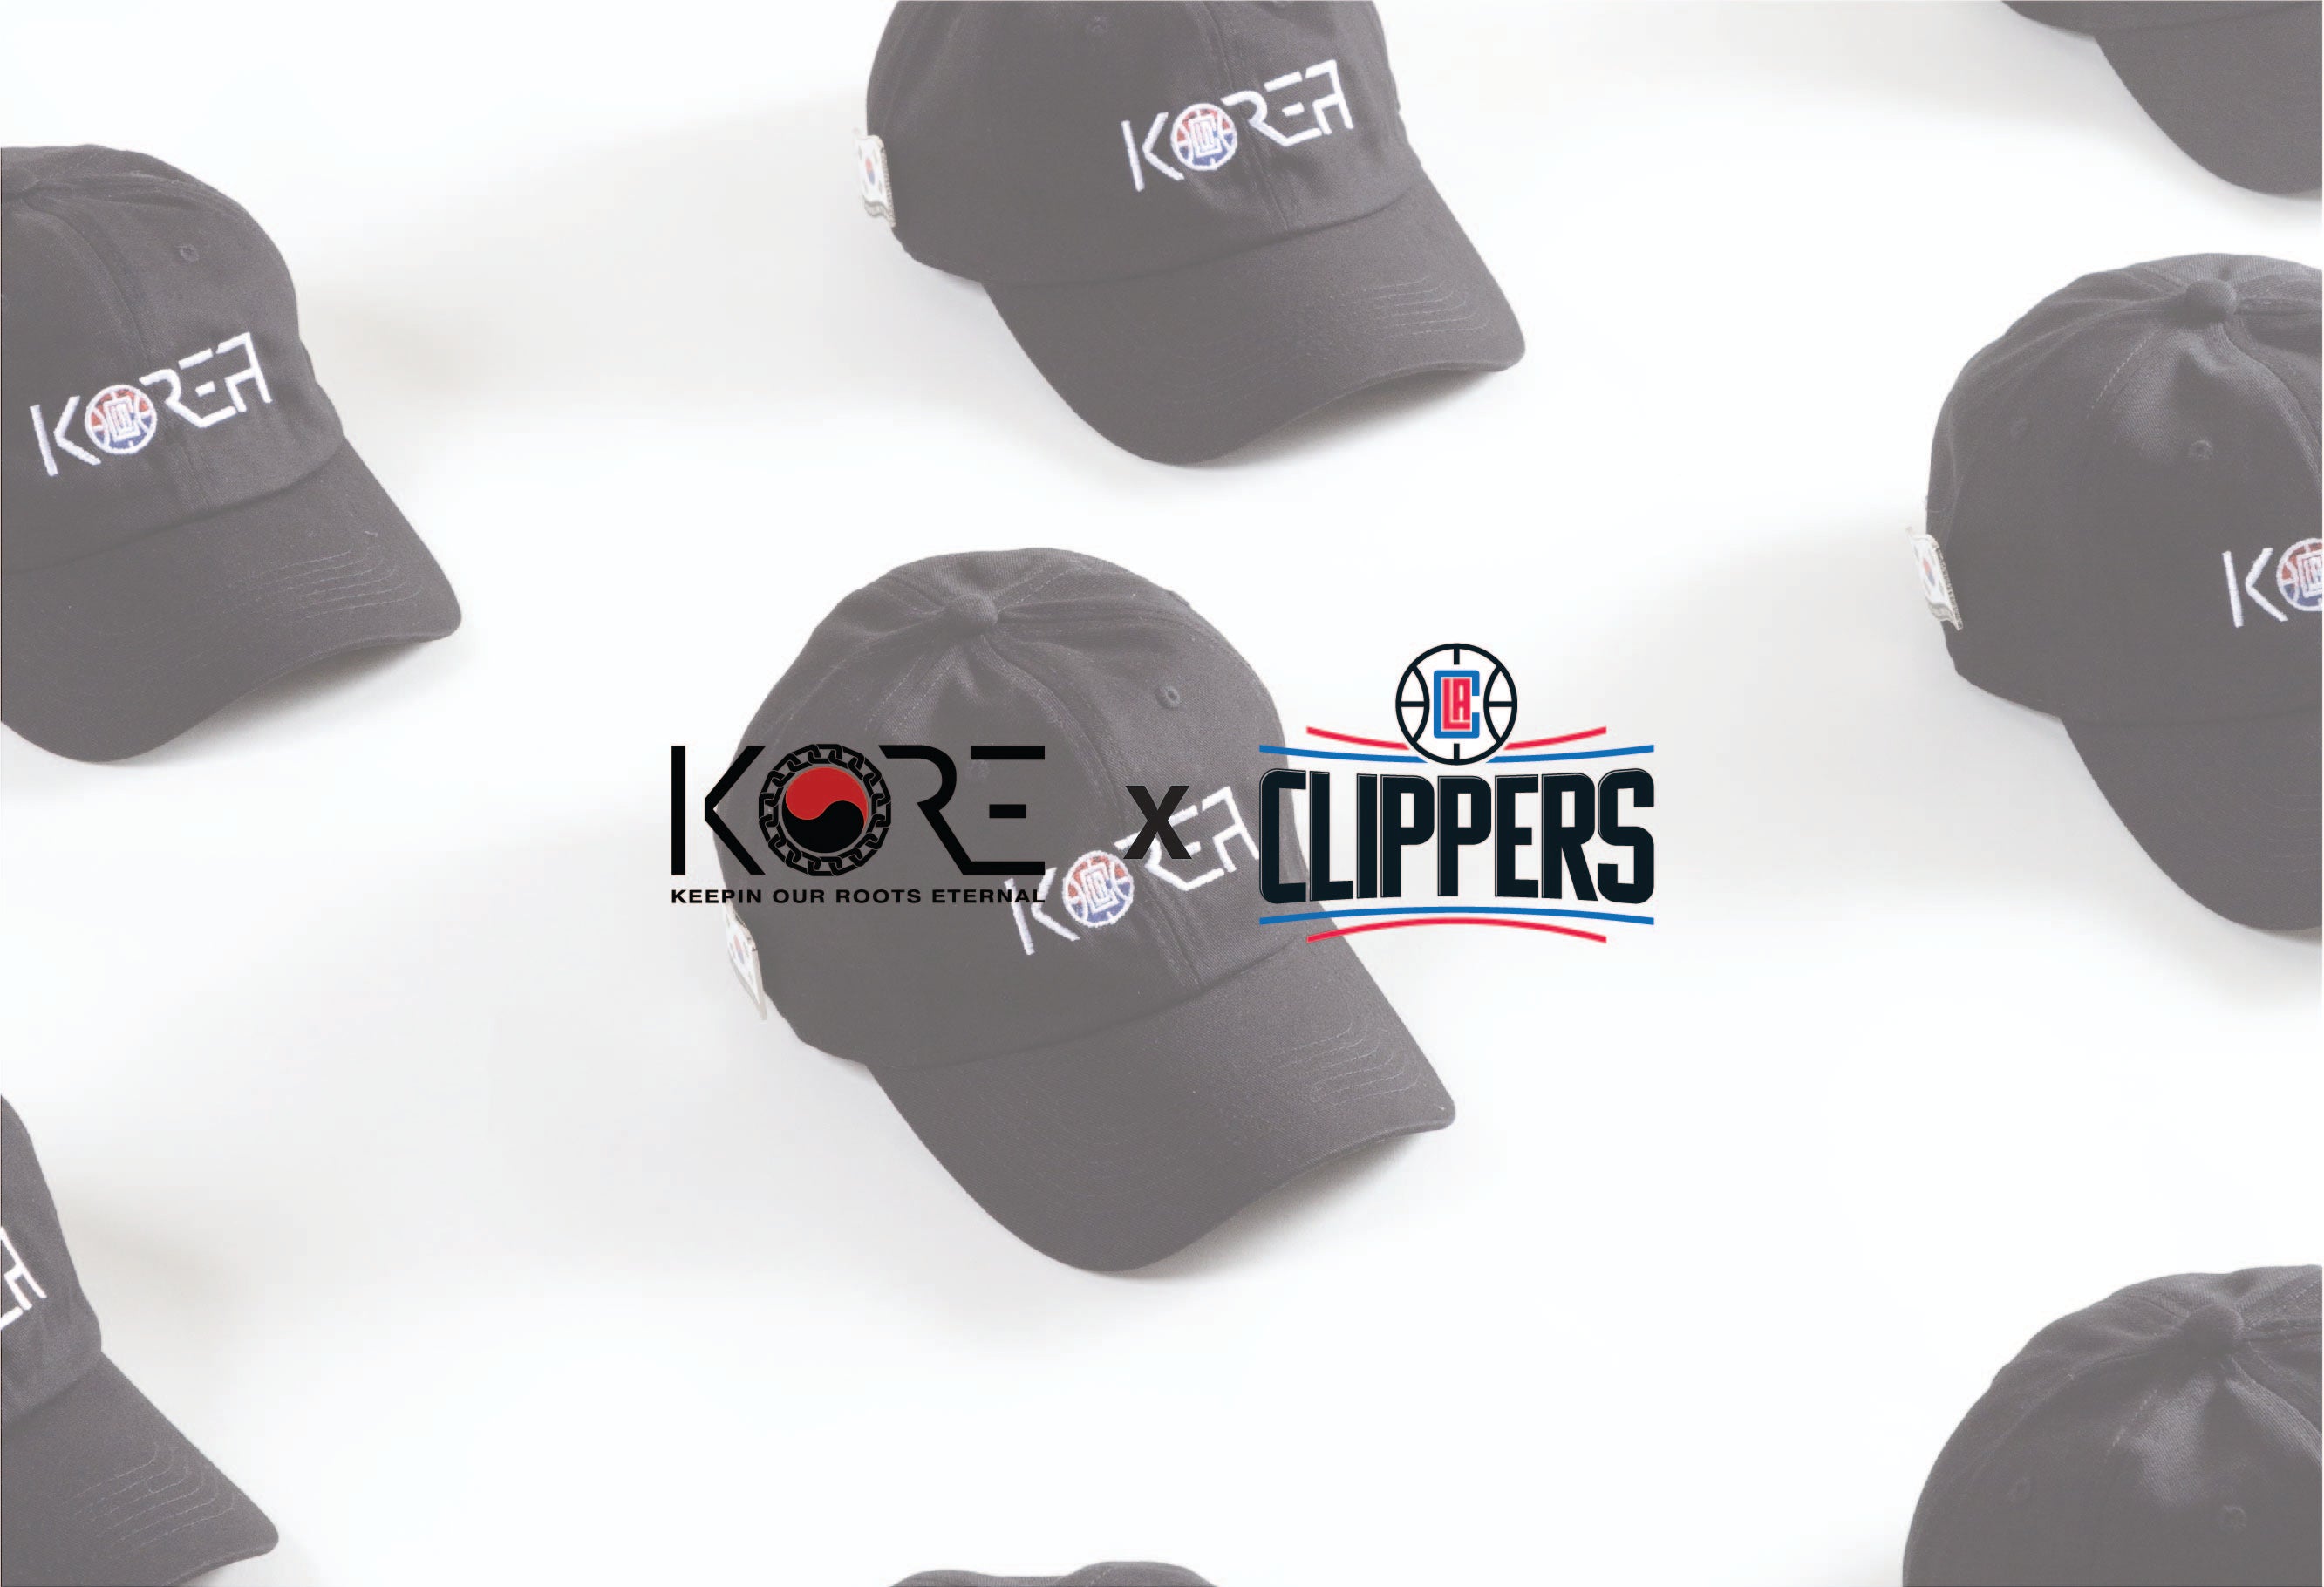 KORE x LA CLIPPERS - 10 Year Anniversary at Korean Heritage Night with the CLIPPERS on Korean American Day